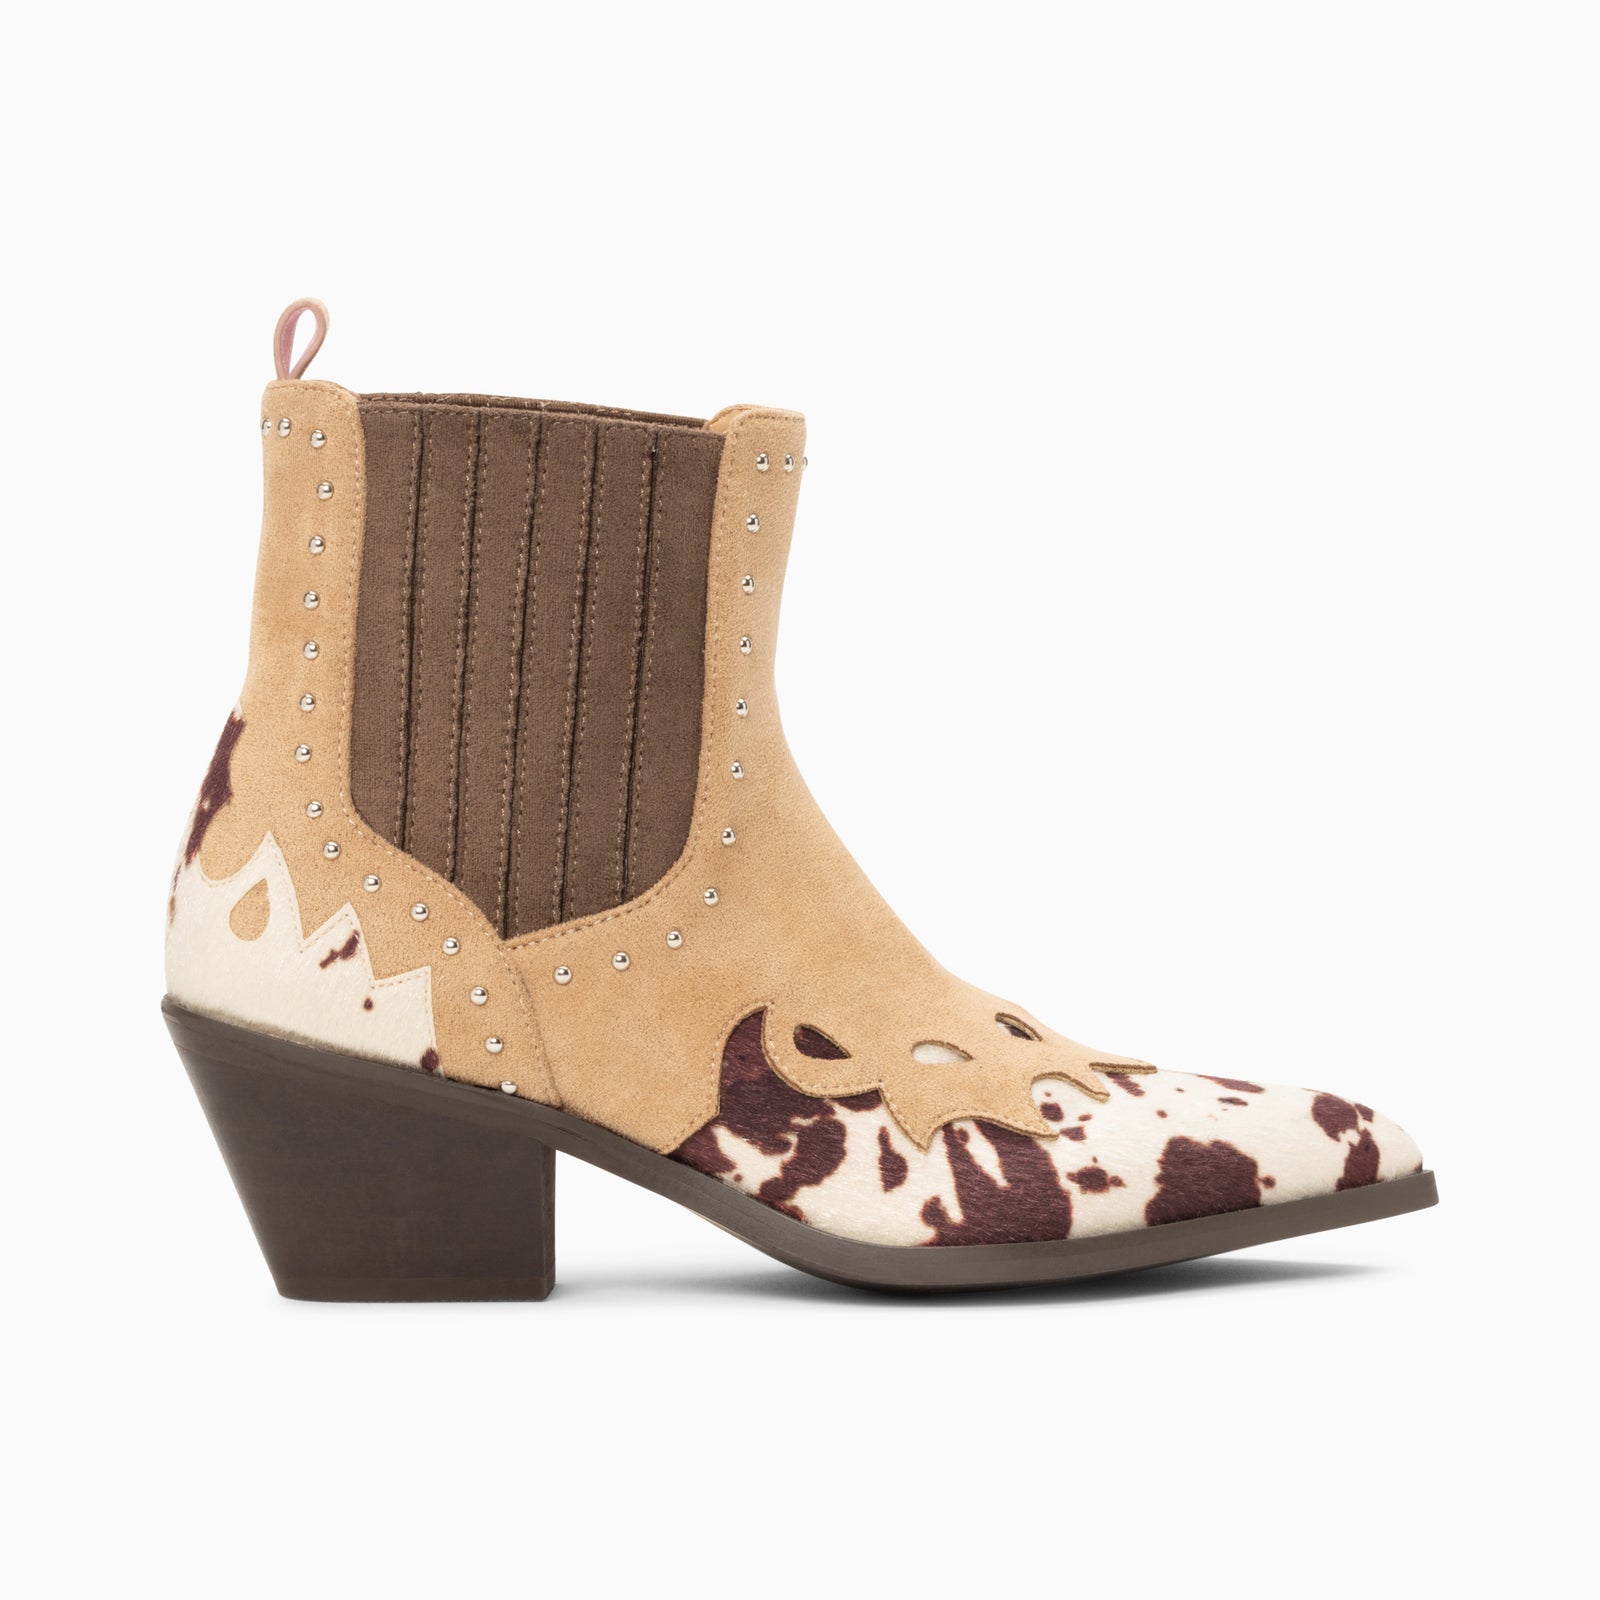 entanglement alder Lily Le Marais bi-material beige and cowhide cowboy boots with studs • Vanessa Wu